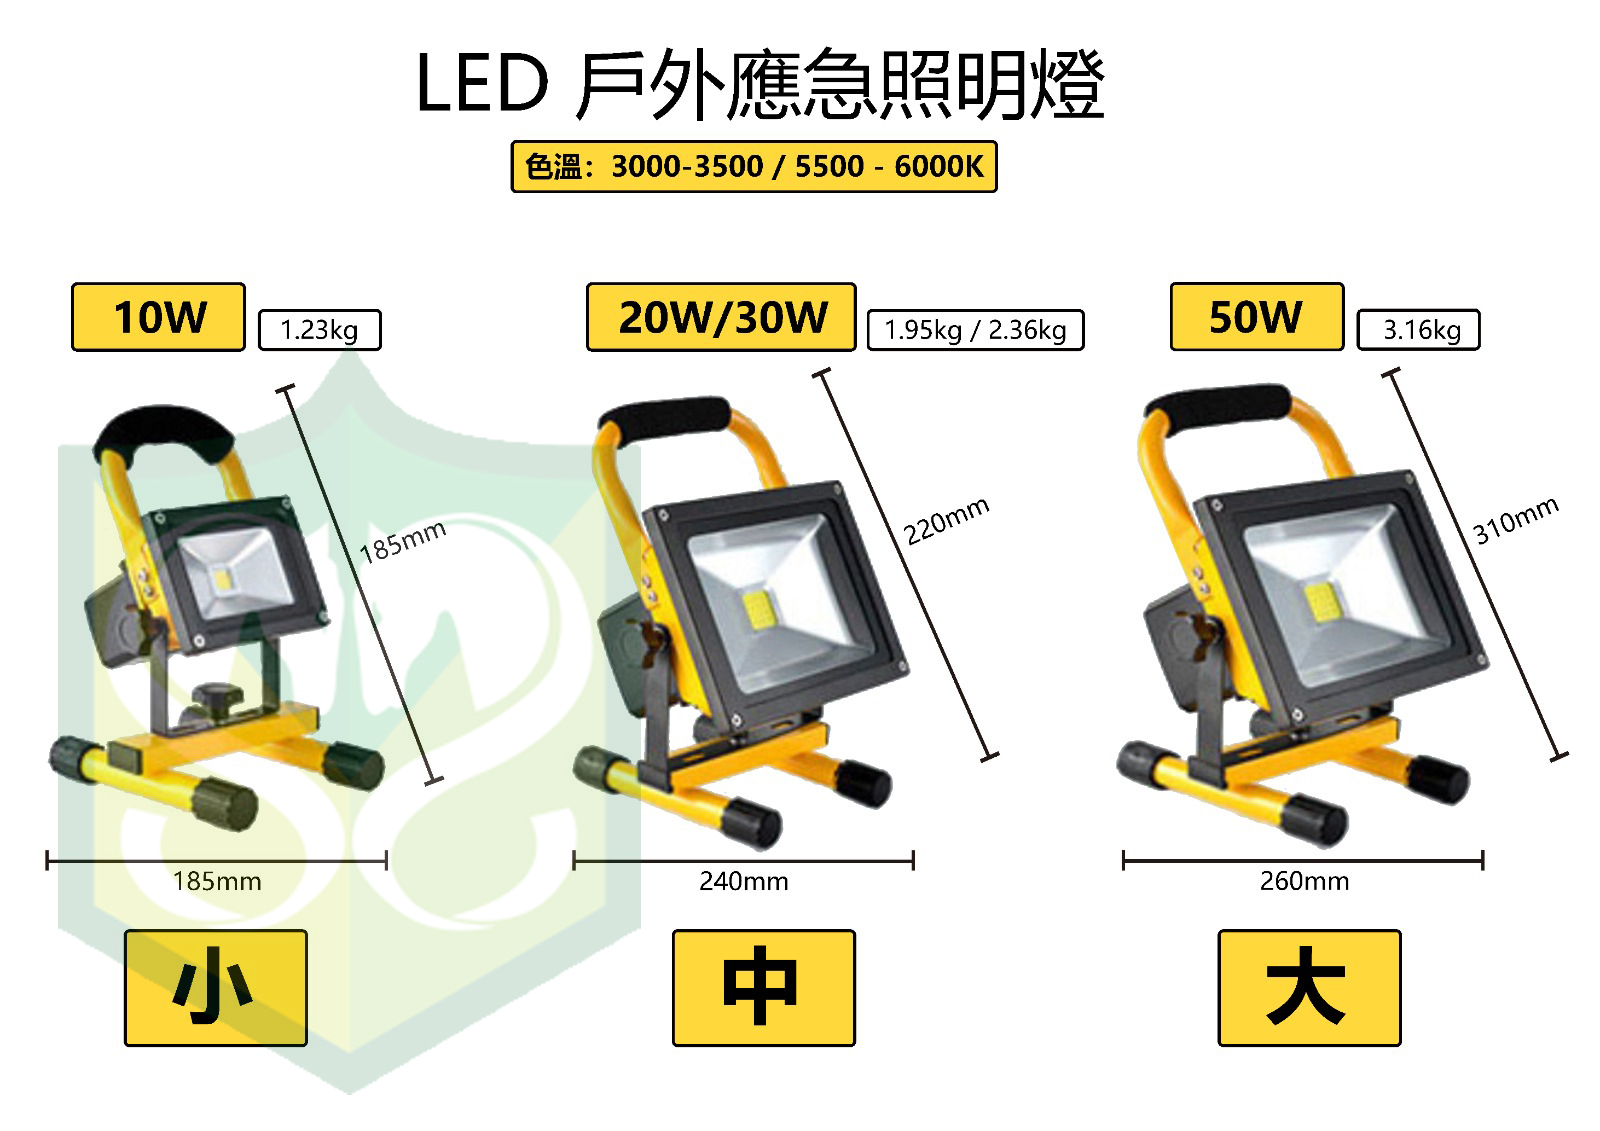 LED PORTABLE & RECHARGEABLE LIGHT